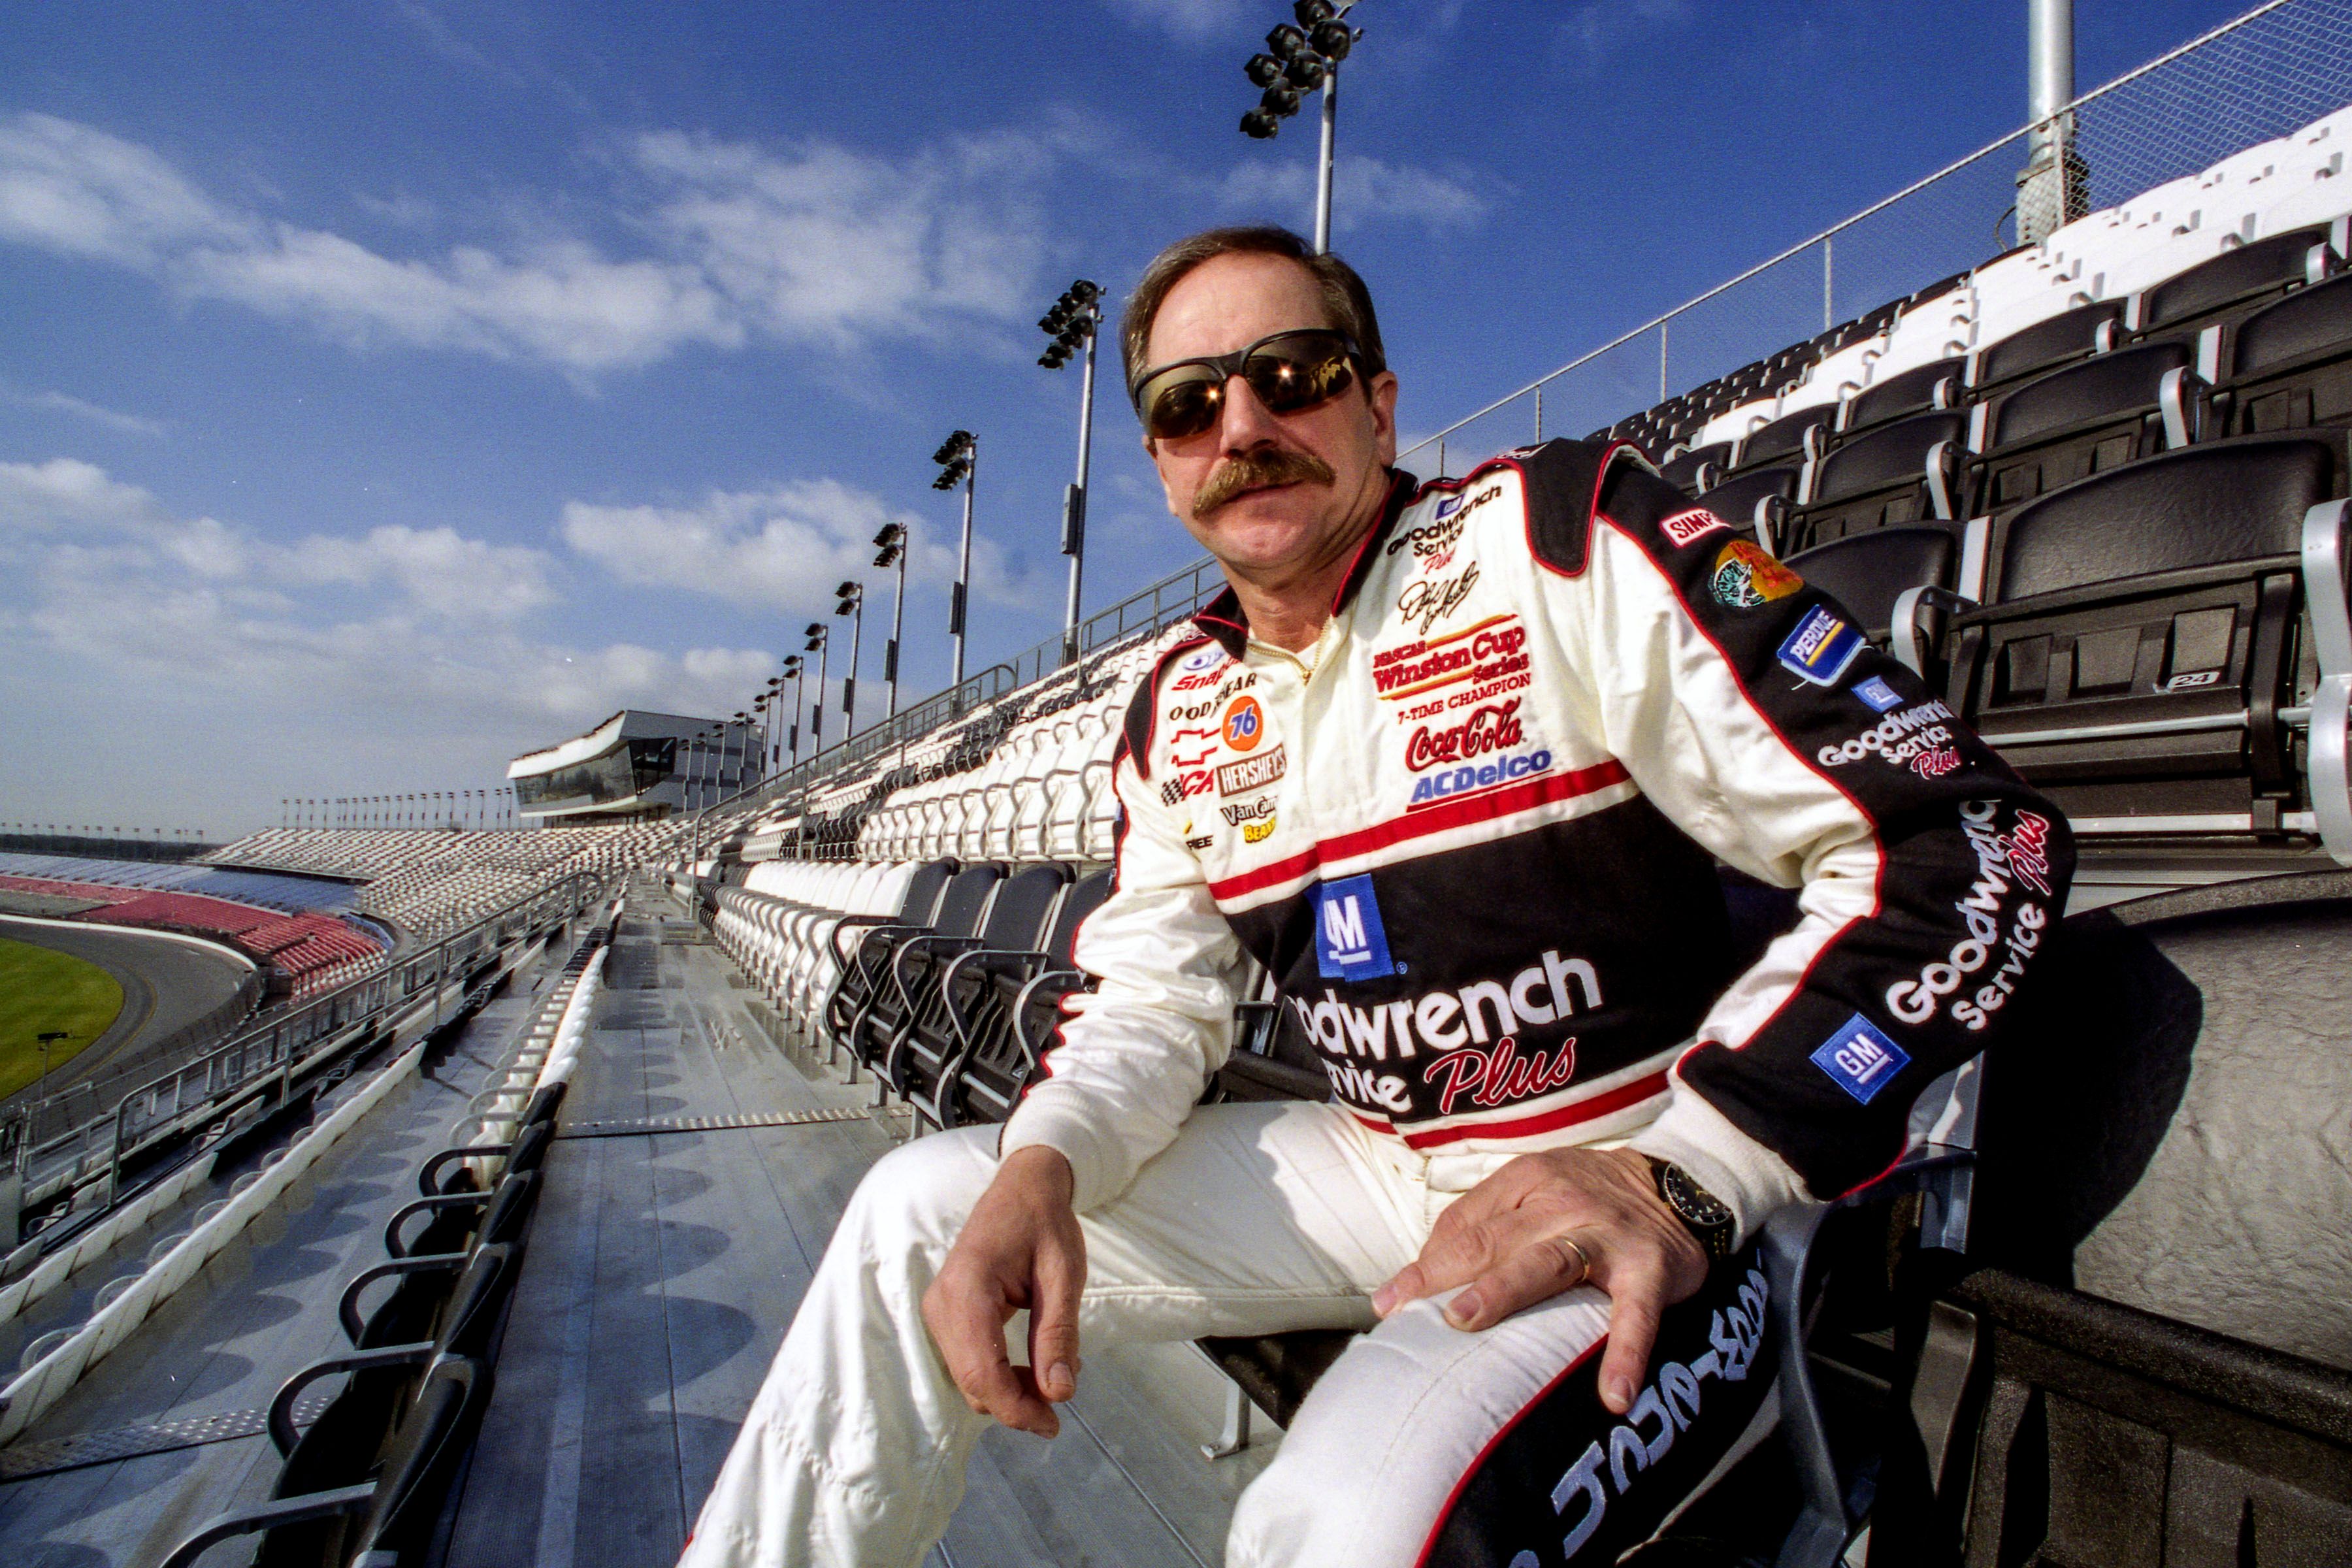  Dale Earnhardt at the Earnhardt Grandstand at the Daytona International Speedway in 2001, Daytona, Florida | Source: Getty Images